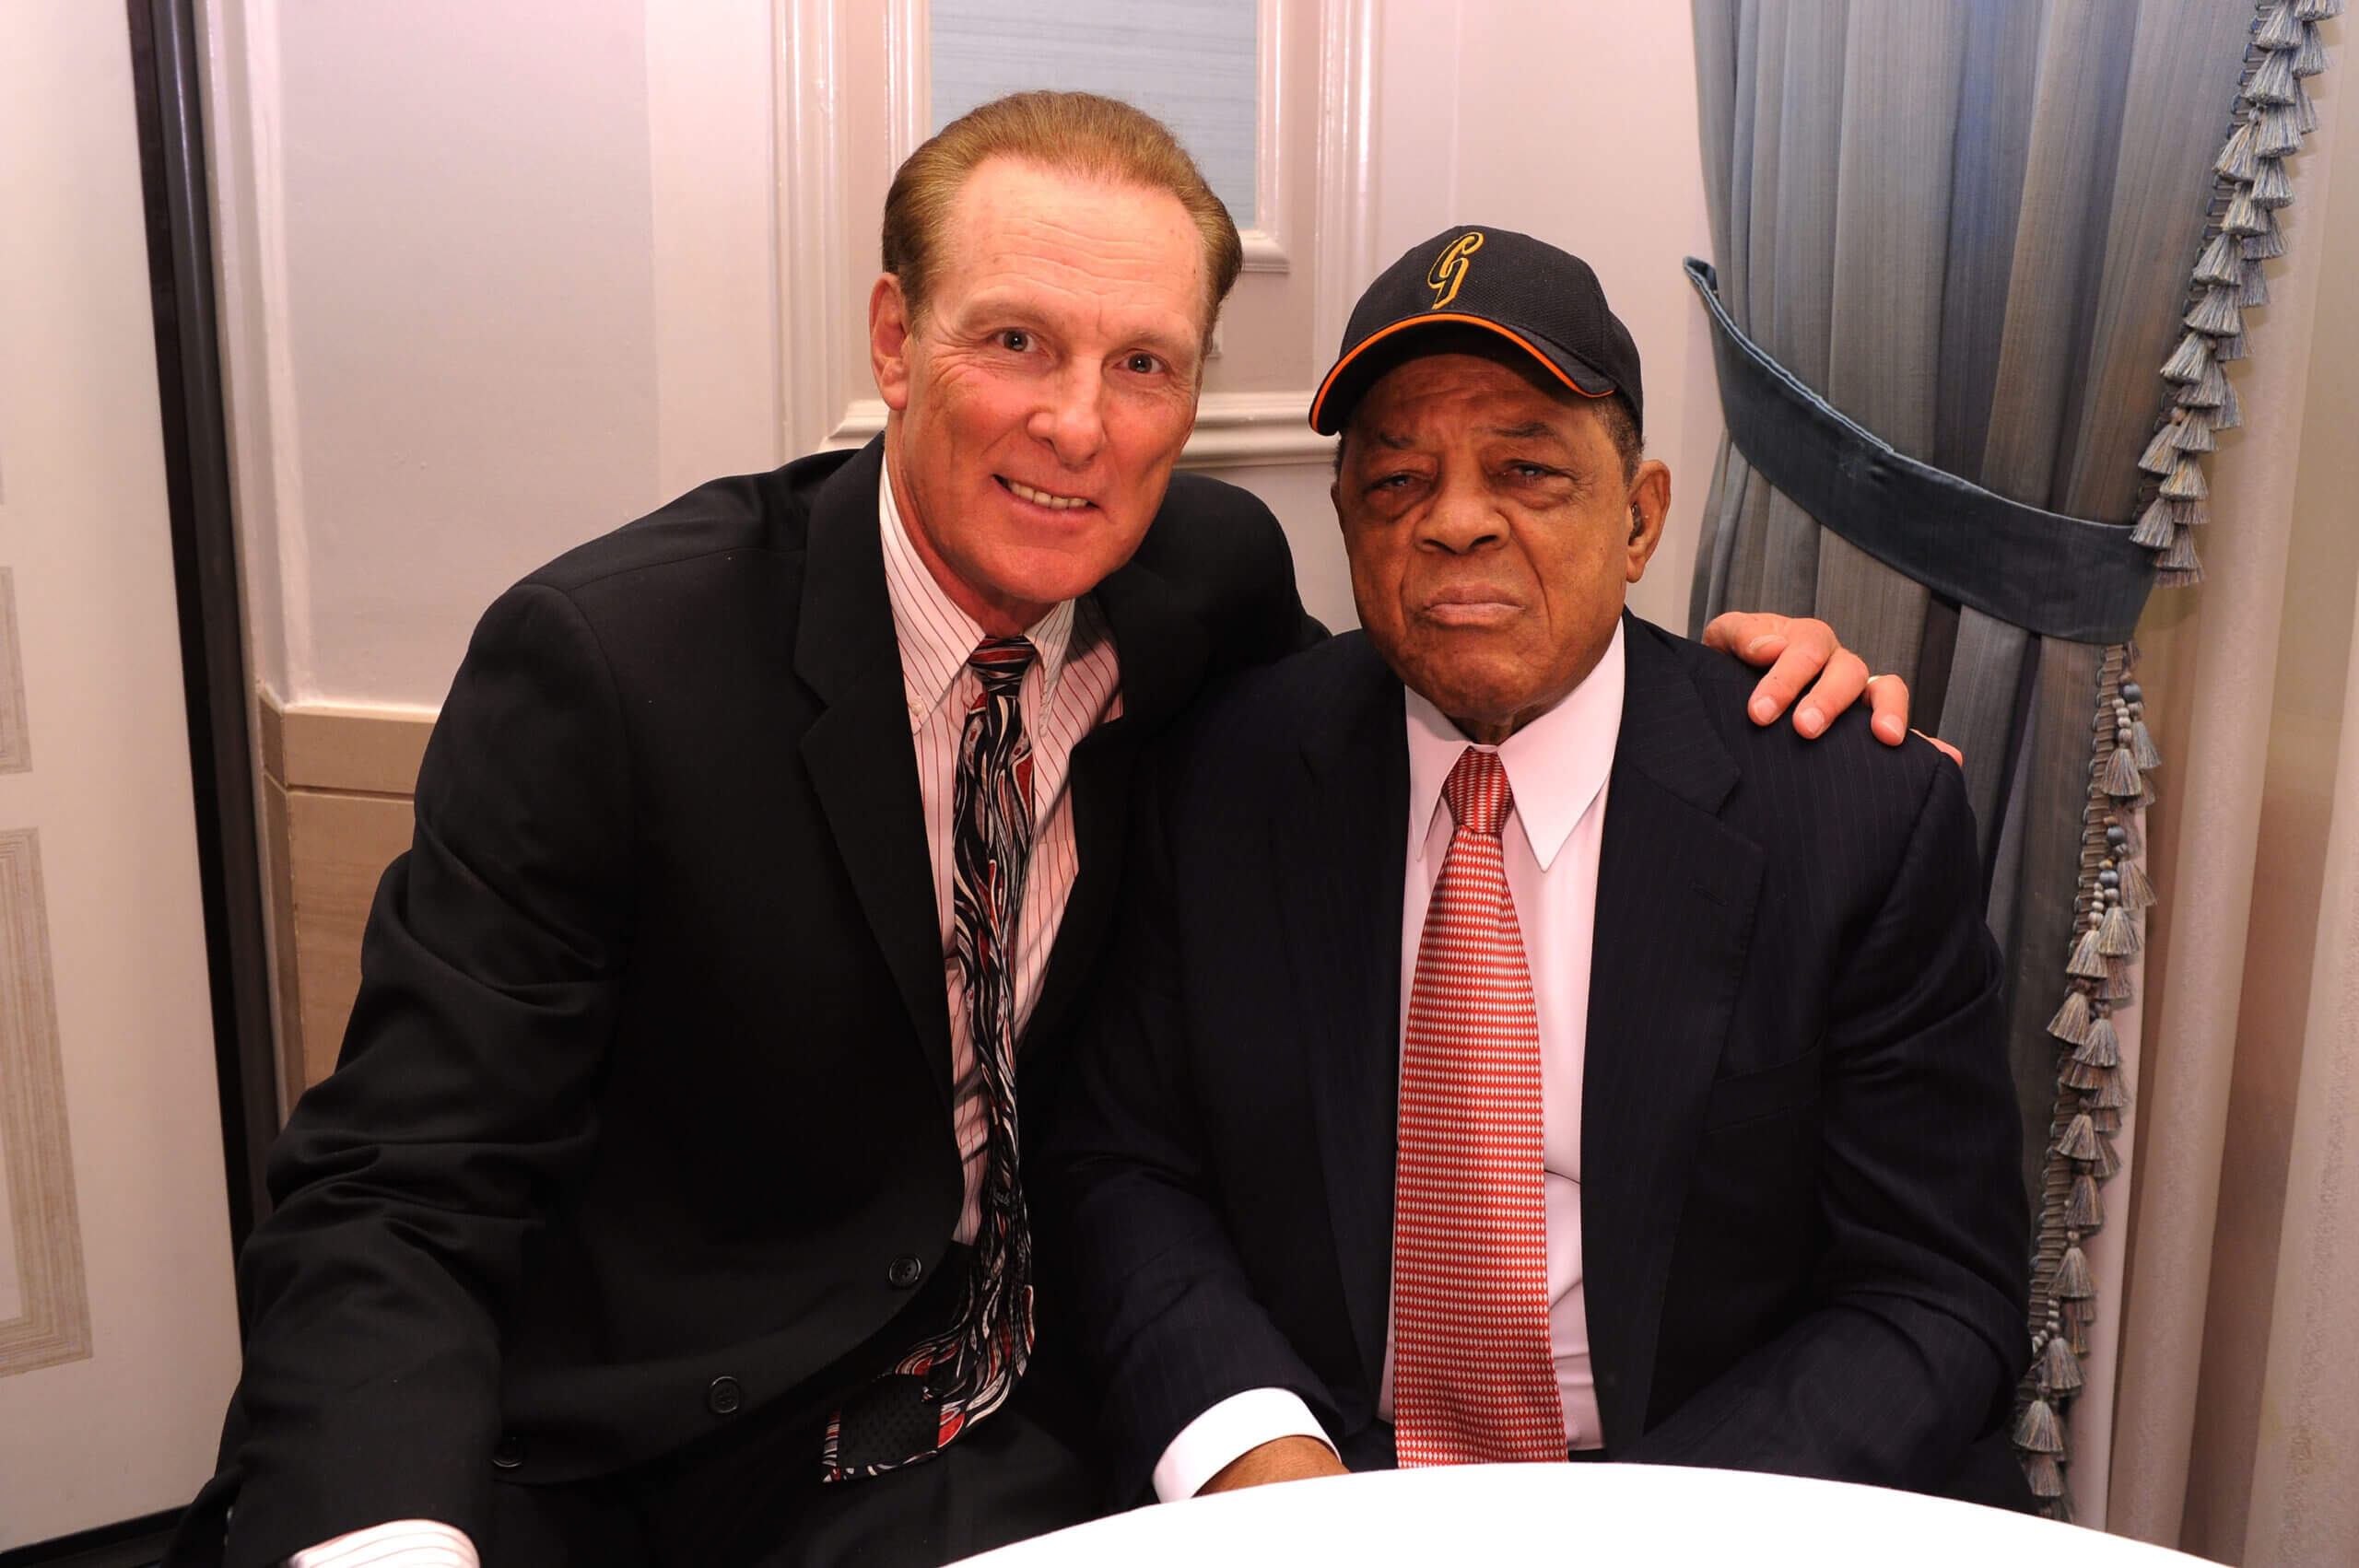 Rick Barry ran onto the field to meet Willie Mays. A friendship was born